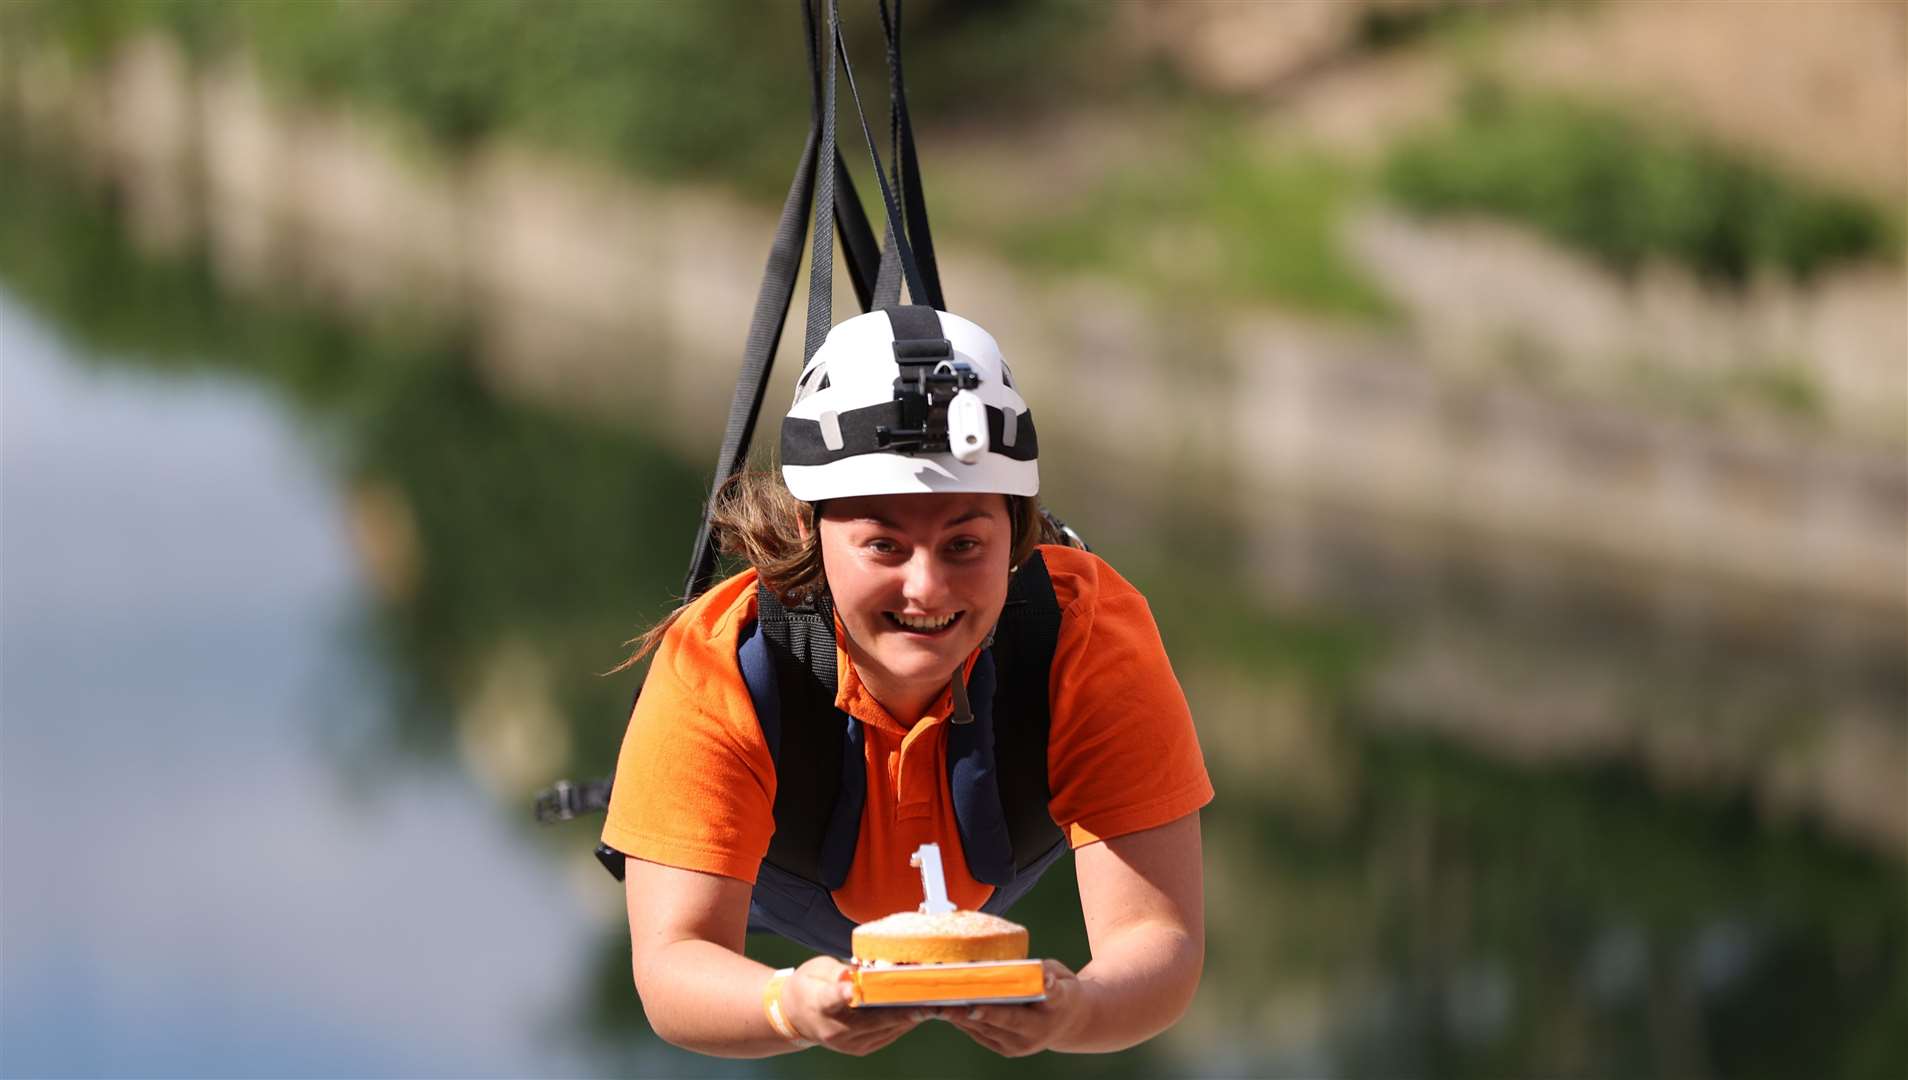 The adventure park will also be introducing new early sessions for people with limited mobility. Photo: Hangloose Adventure Bluewater